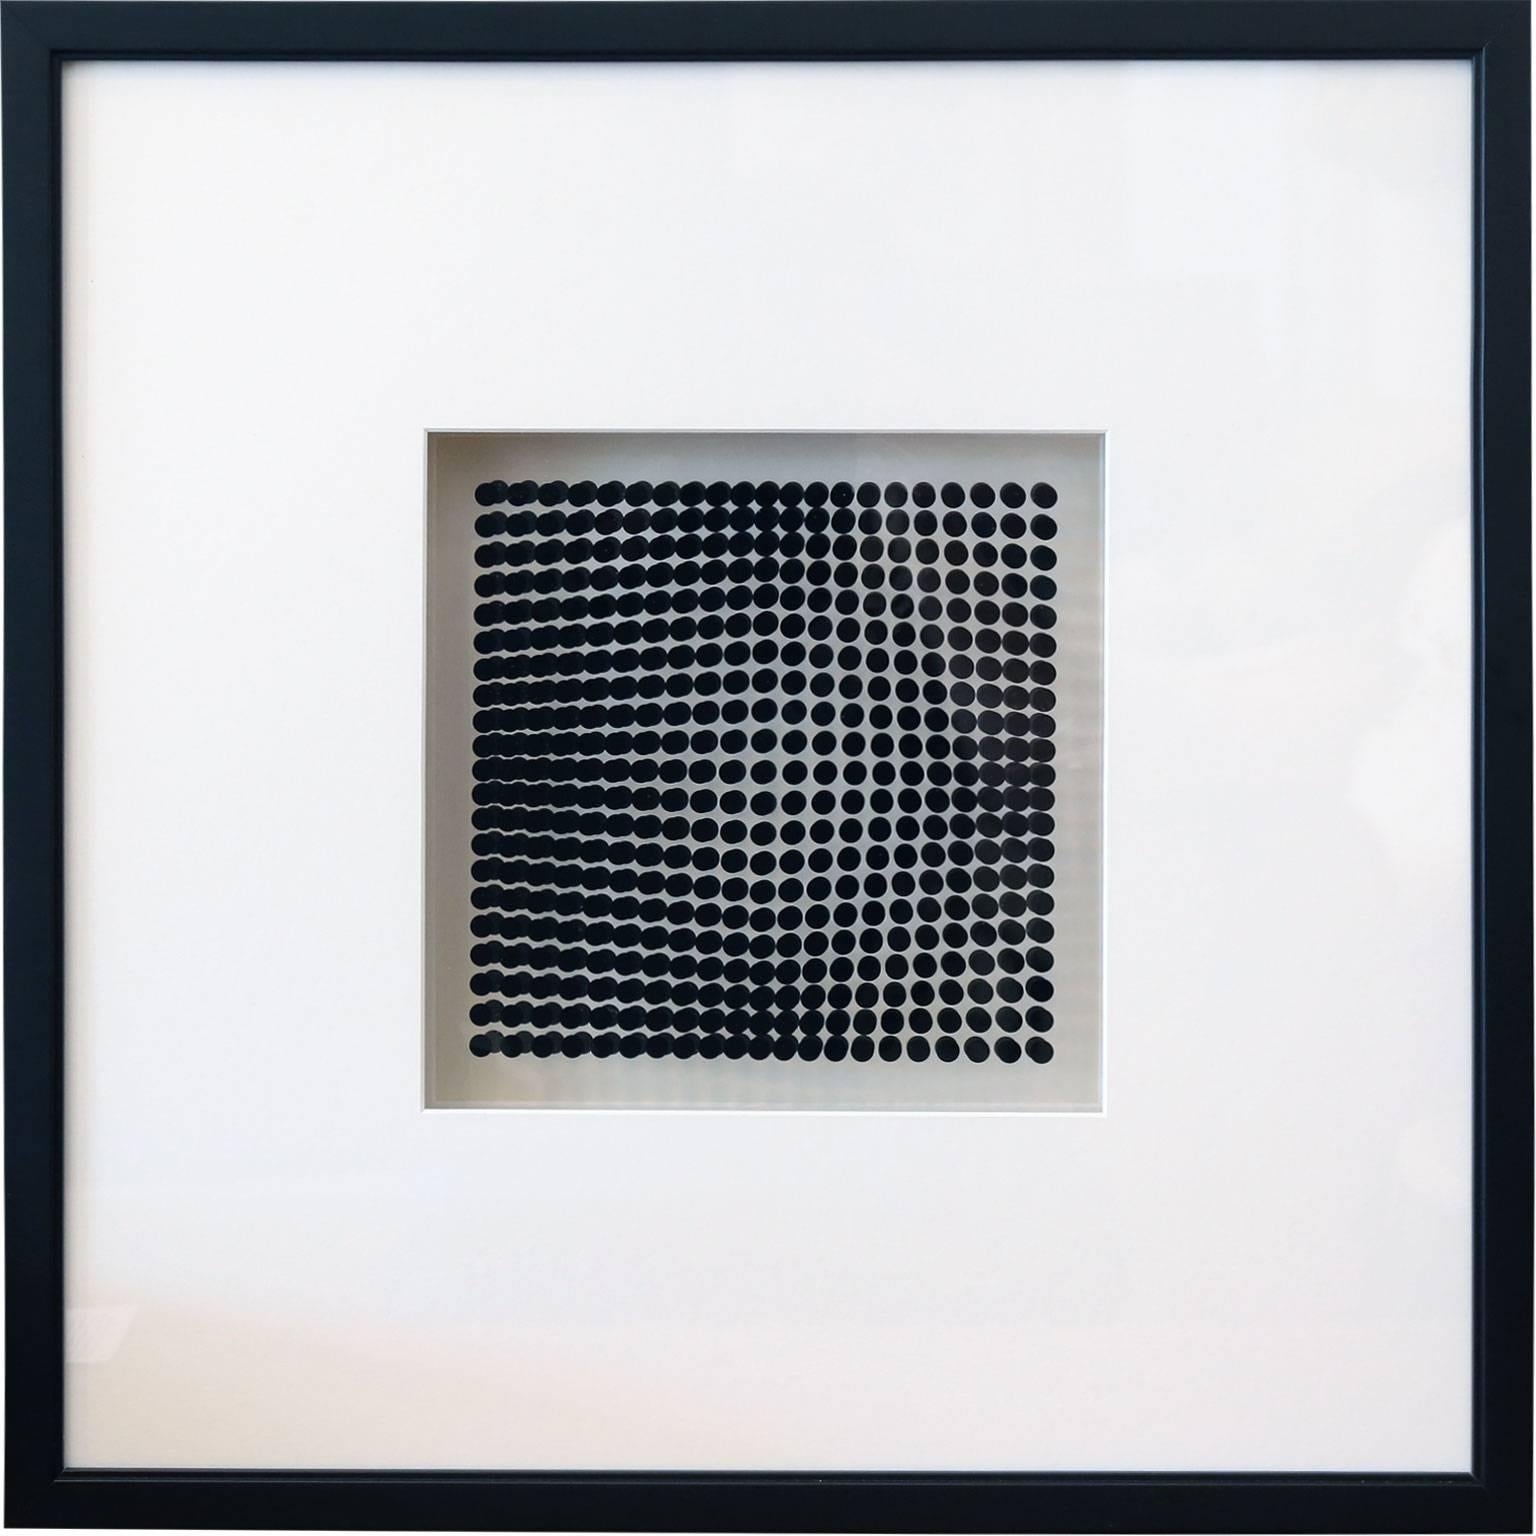 Six Vasarely prints: Oeuvres Profondes. Six different original midcentury op art prints by Victor Vasarely, from his 'Oeuvres Profondes' series. Editions Du Griffon Neuchâtel, 1973, unsigned as issued, silk screen on transparency over printed rag